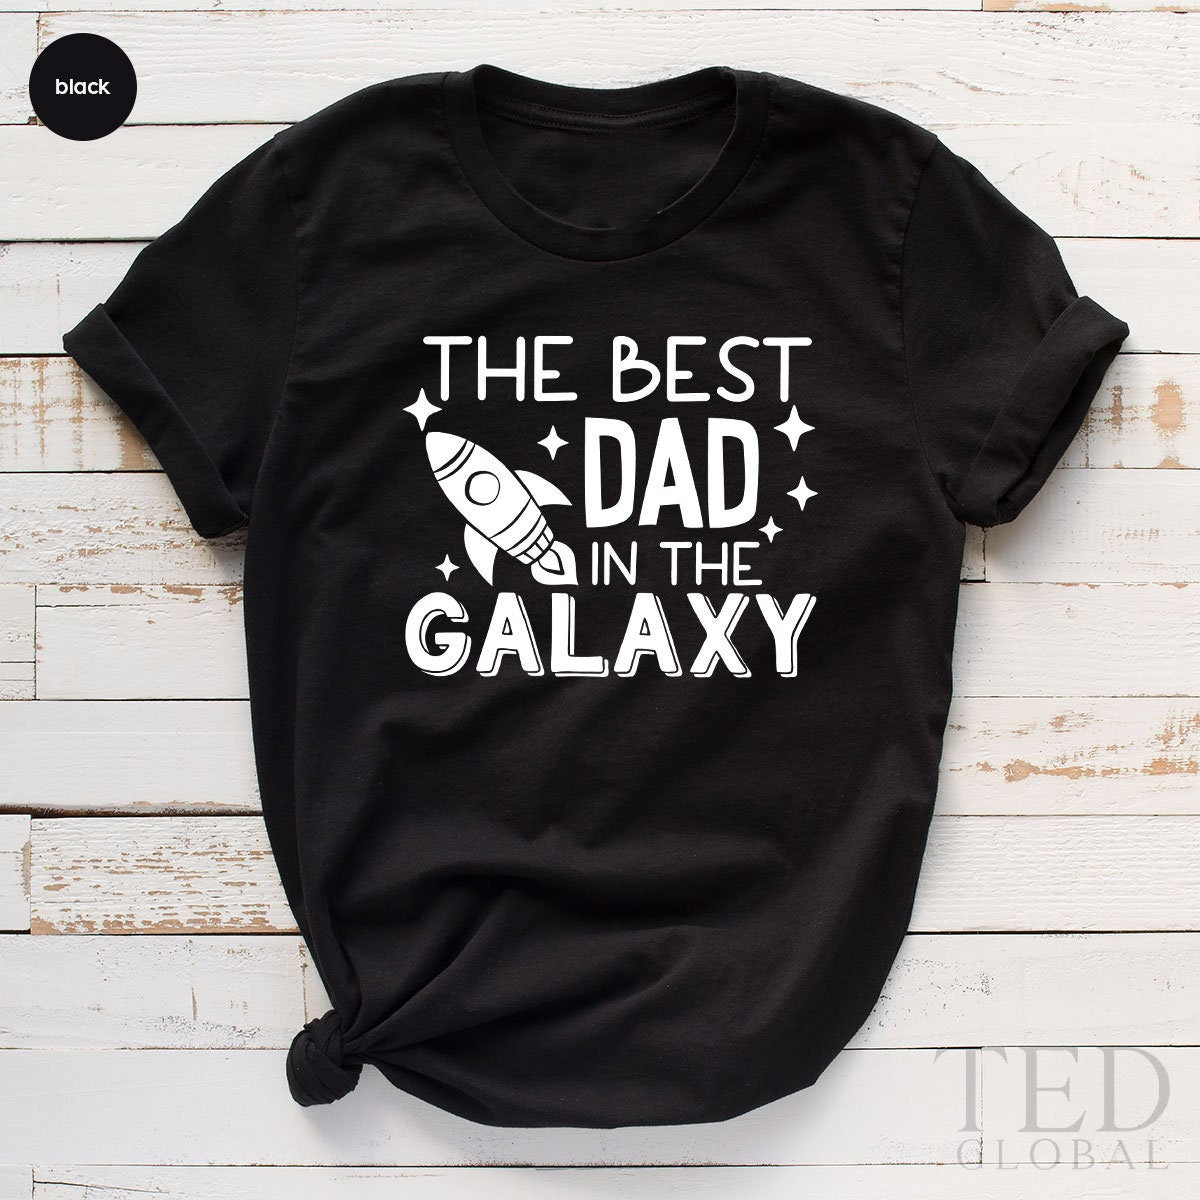 Best Dad Shirt, Cool Father Shirt, Funny Father T Shirt, Fathers Day TShirt, The Best Dad In The Galaxy Tee, Dad Birthday Gift - Fastdeliverytees.com